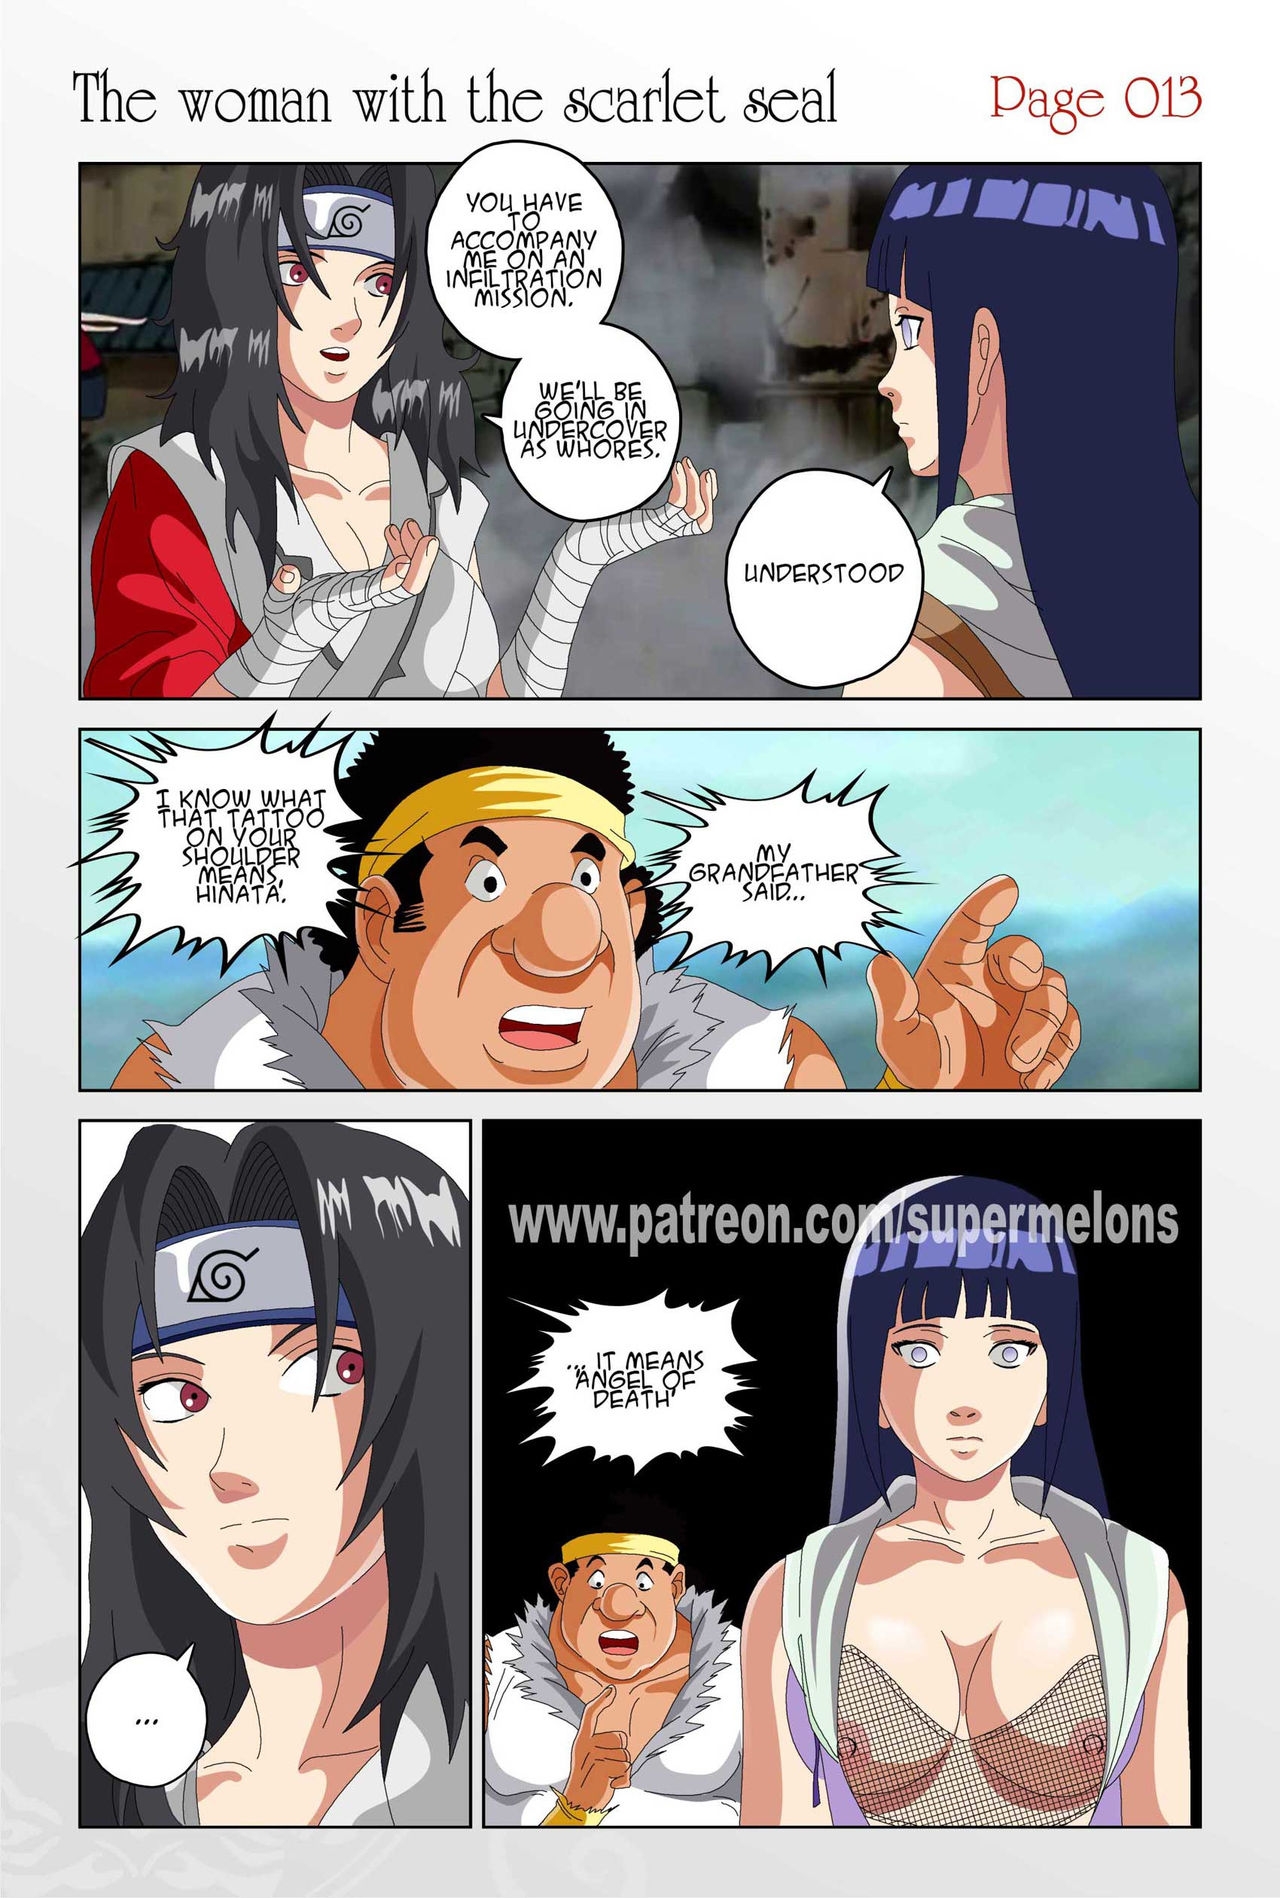 [Super Melons] The Woman with the Scarlet Seal (Naruto) 15